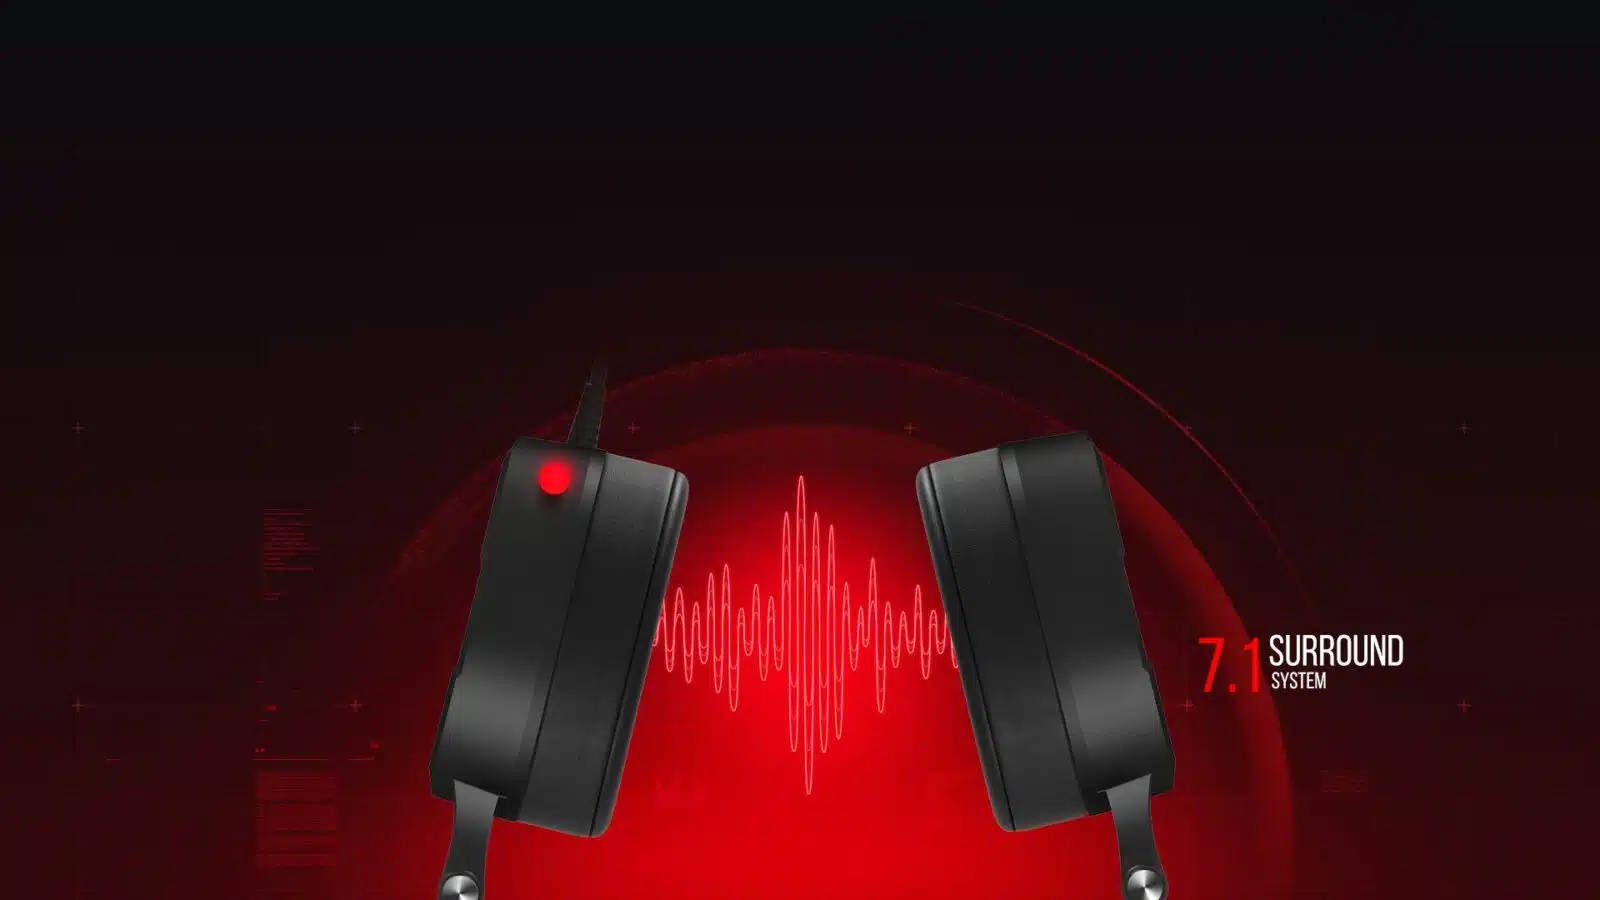 50mm Speaker Unit 50 mm speaker contains NdFeb magnets and high tension CCAW coil. Unique laser trimmed diaphragm offers an extremely accurate. Reproduction of the gaming audio. Dazzling Red Light Cool looking with vivid red led backlit. Glaring LED lights are designed on the earcups, highlighting the atmosphere of the game. Dual-Chamber Design Speaker Dual sound chambers are added to each ear cup to deliver the ultimate sonic accuracy and clarity, while to avoid inconsistent sound as most of the headsets in the market.